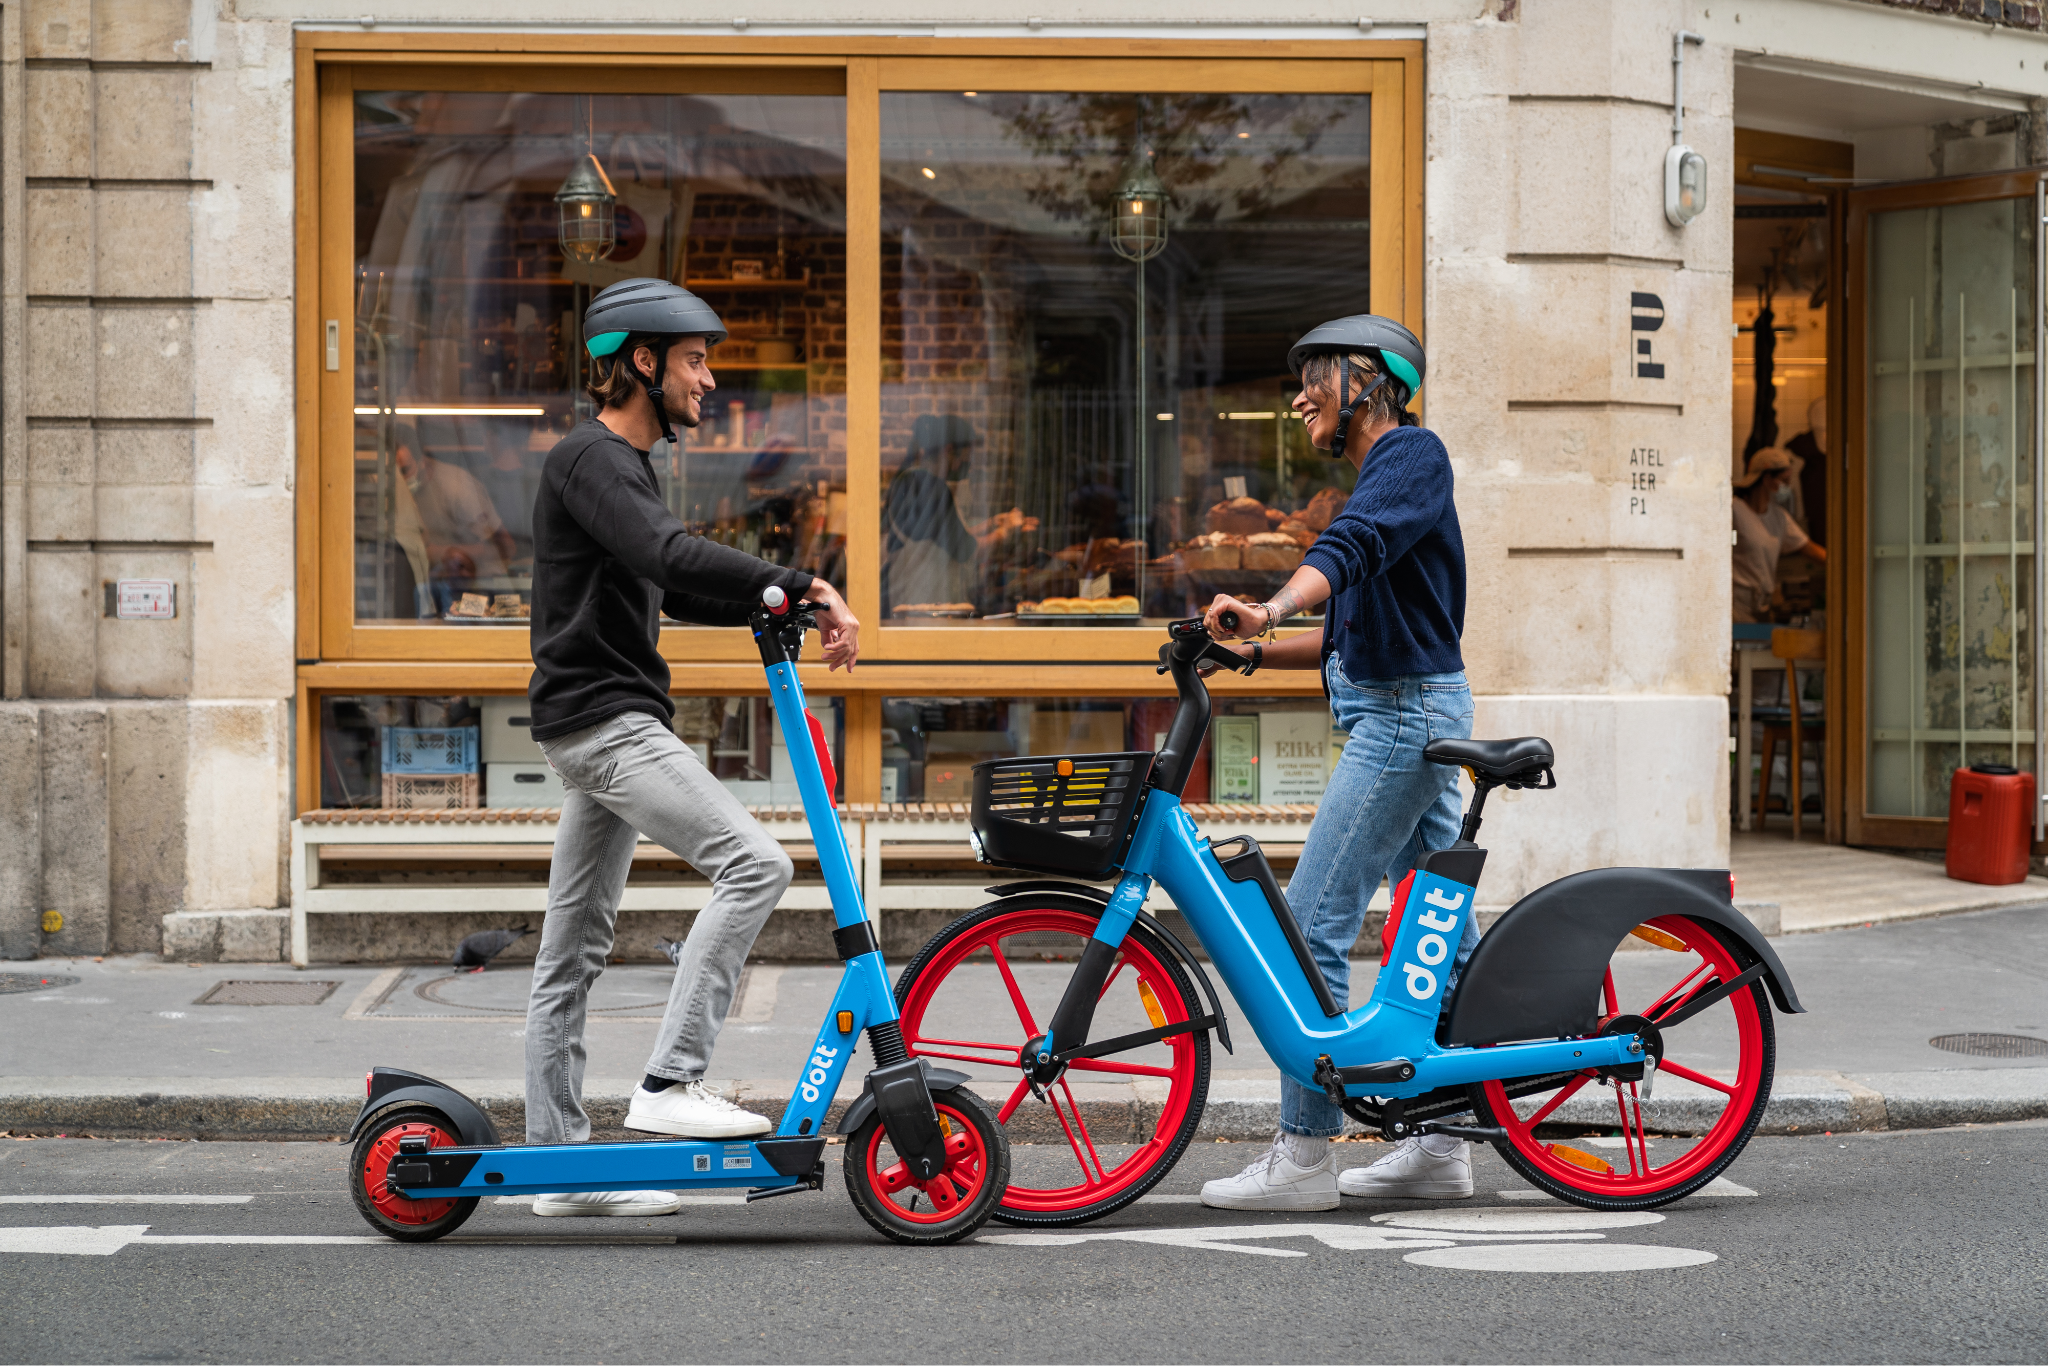 Micromobility usage soars for Dott on car free days